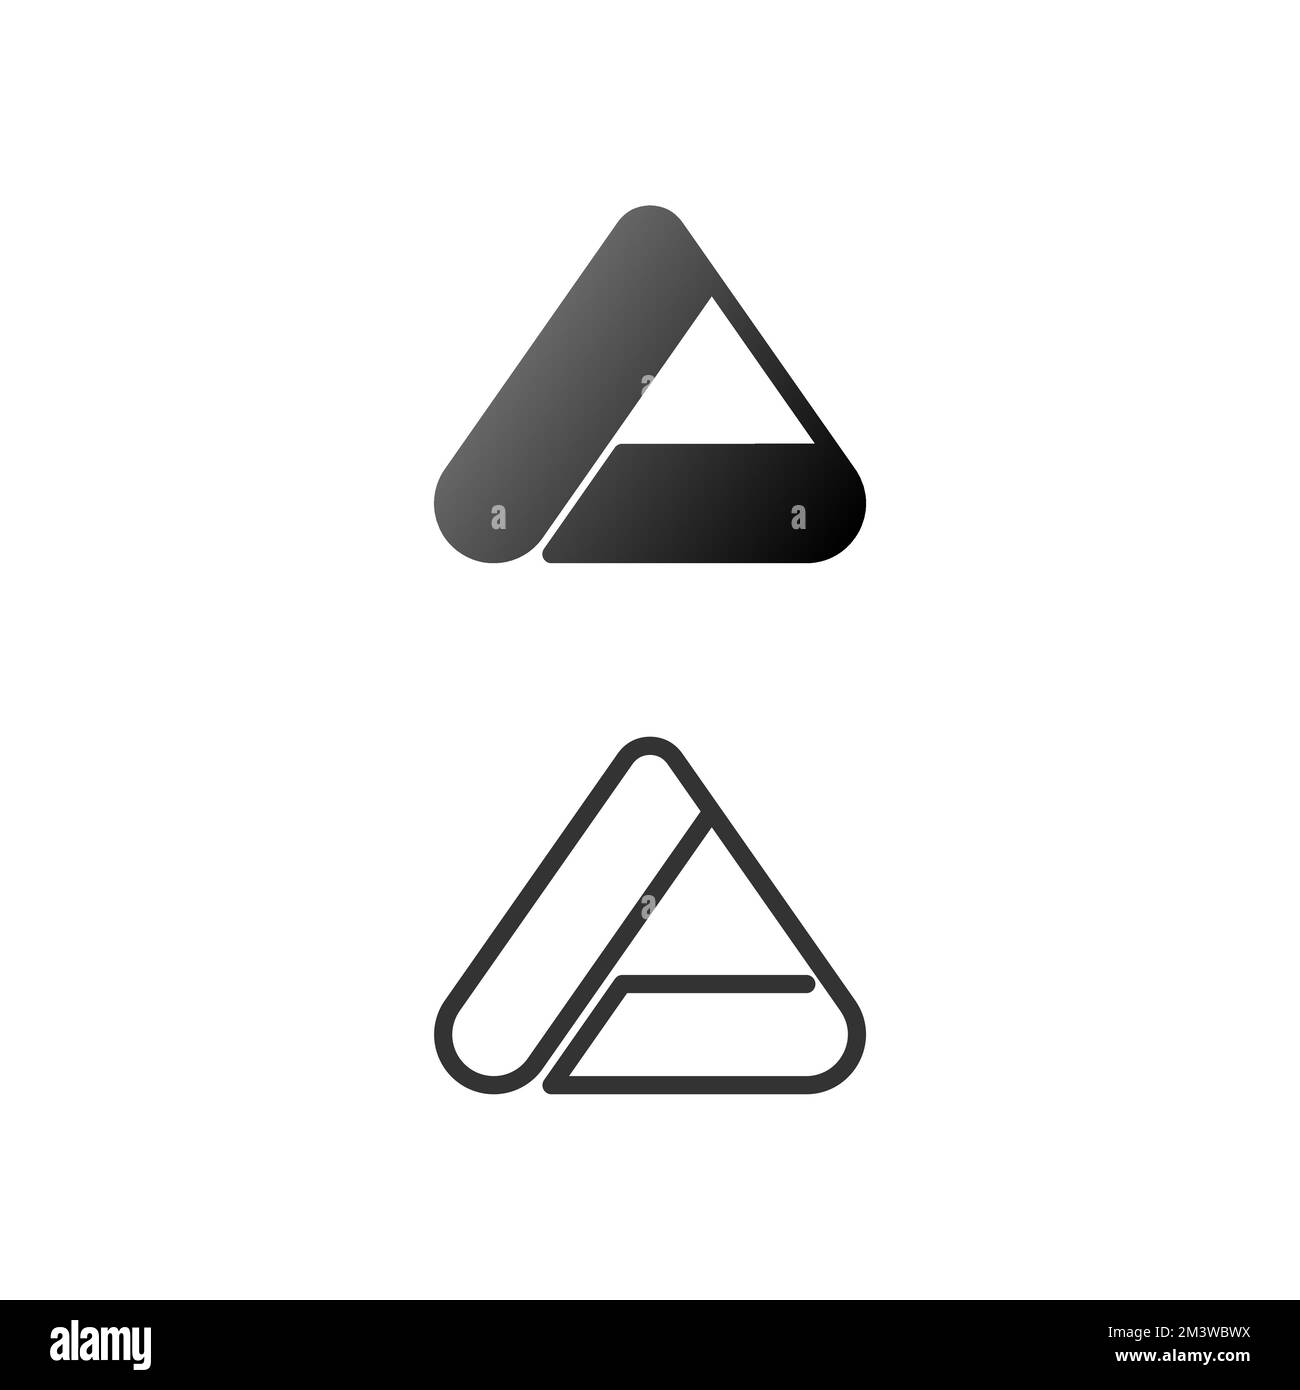 letter A font in triangle unique and attractive image graphic icon logo design abstract concept vector stock. used as a symbol related to initial Stock Vector